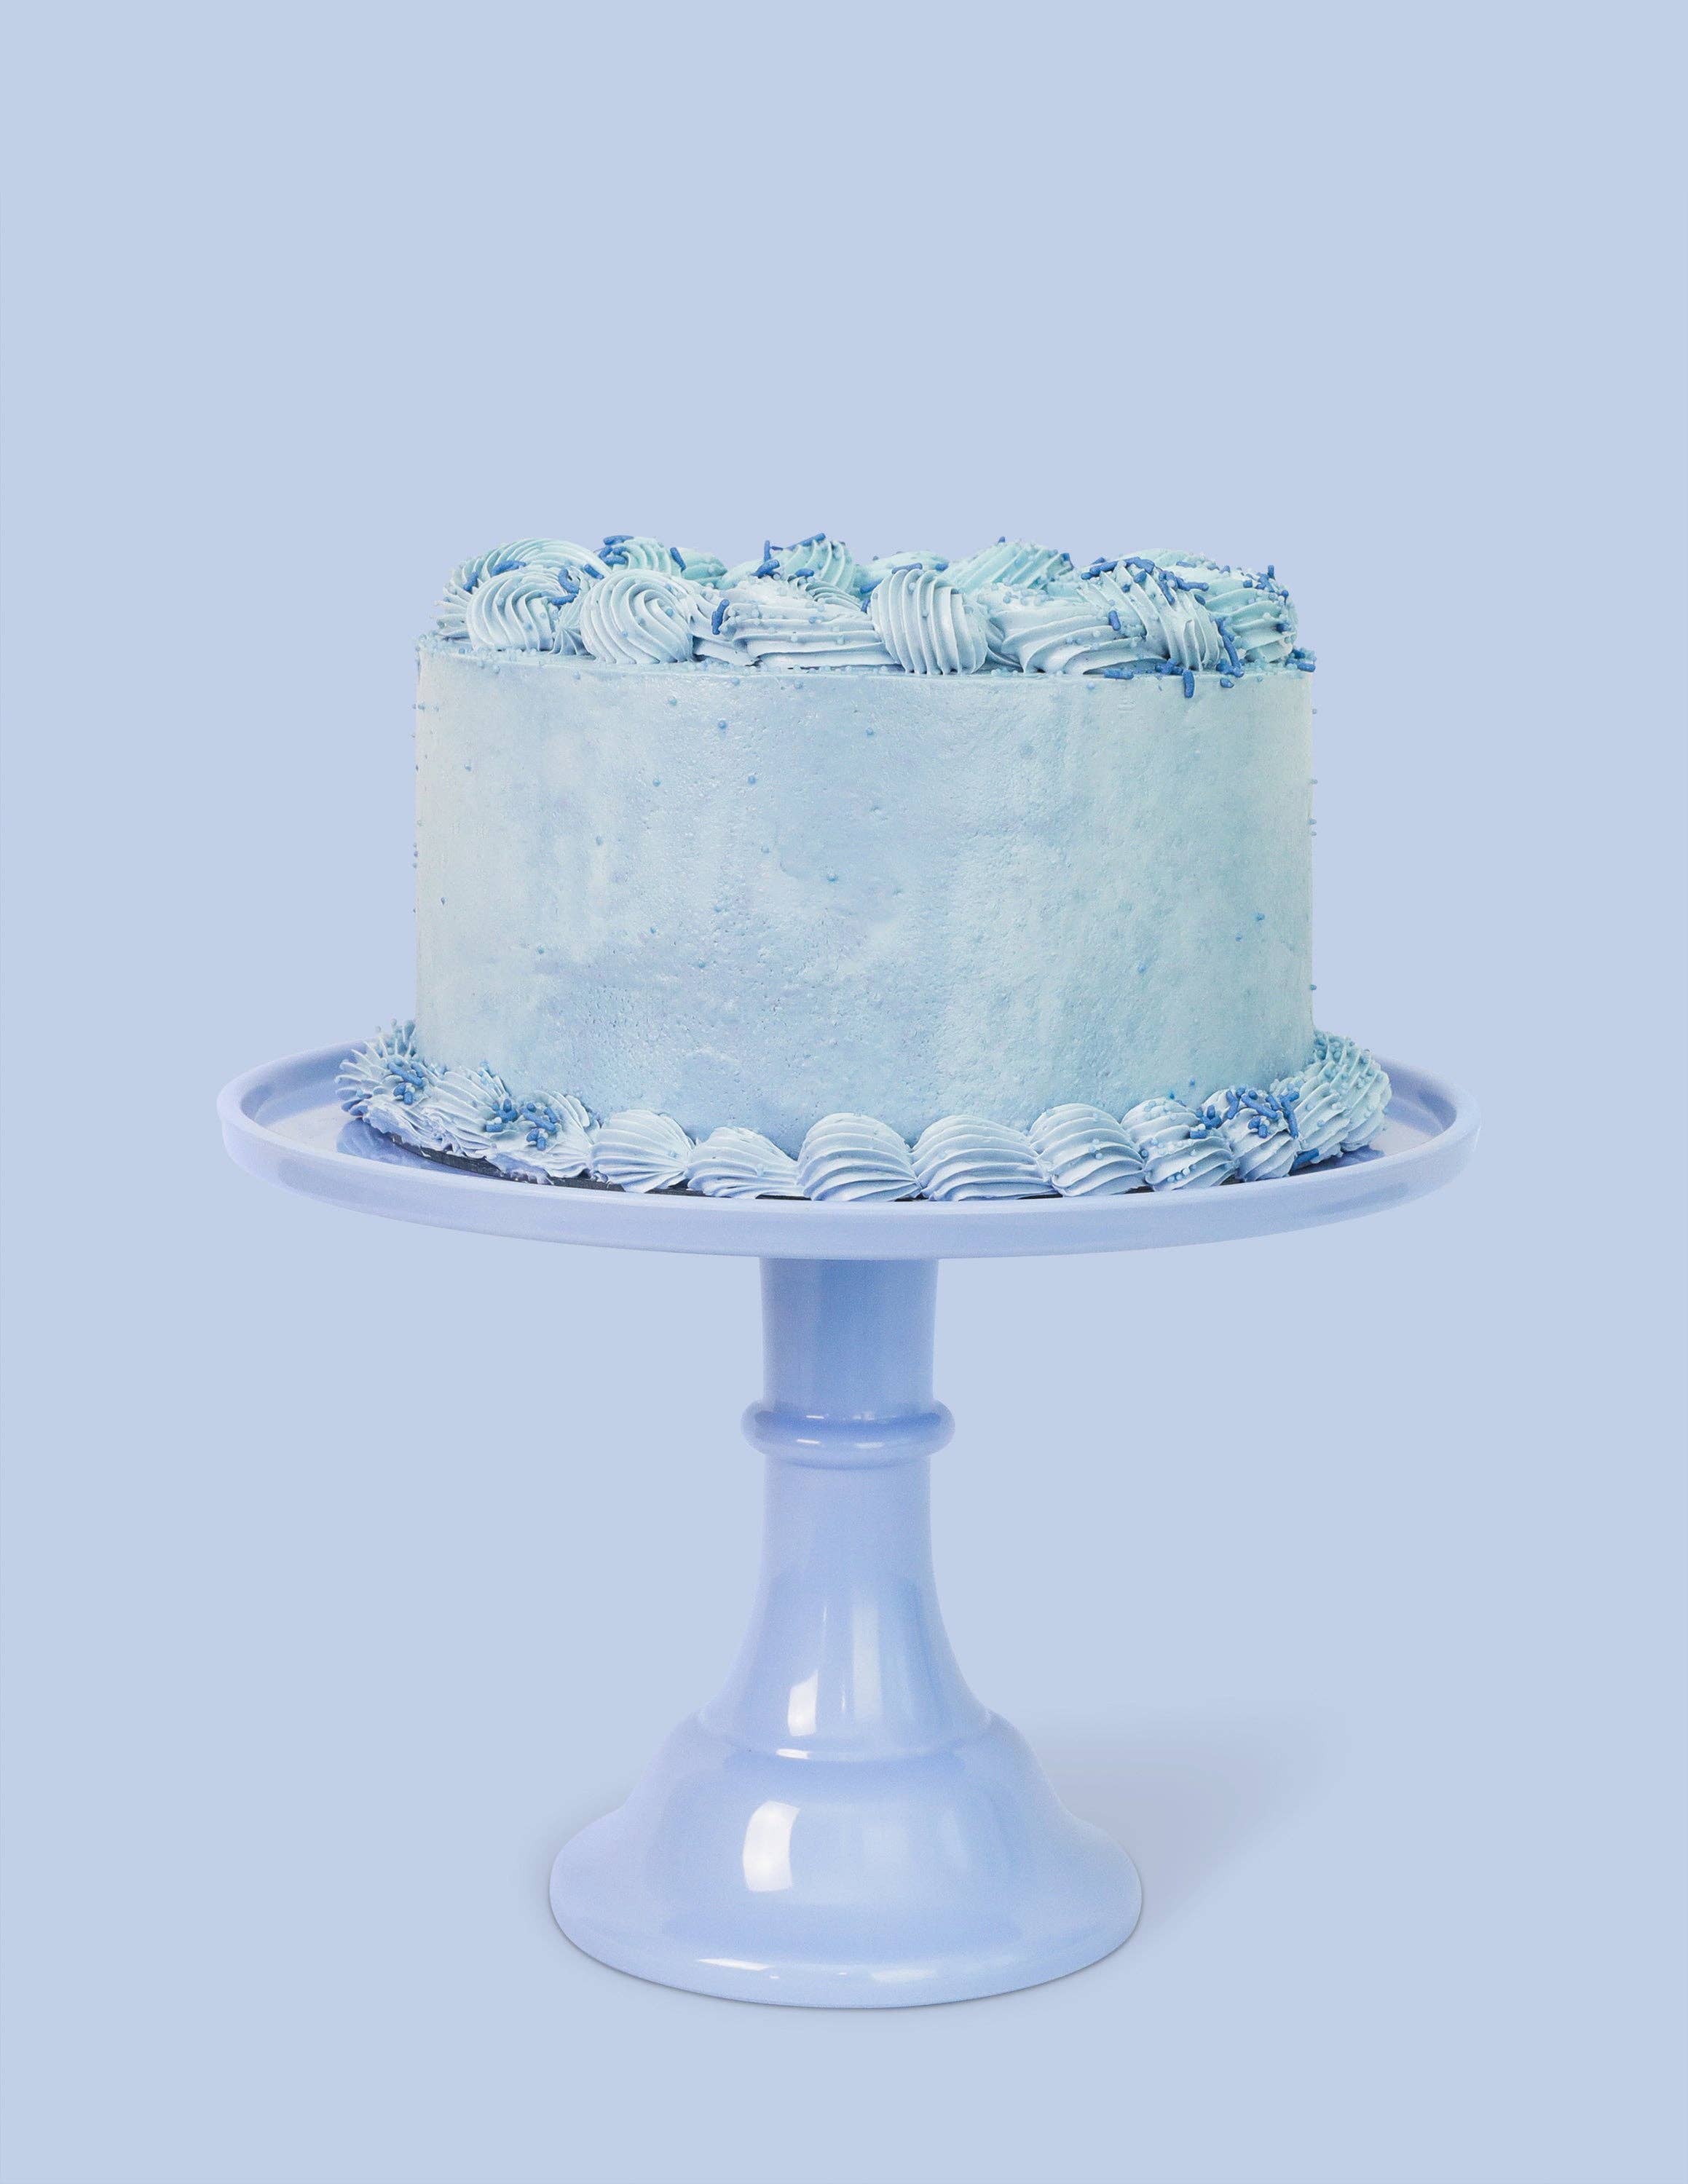 Crafty cake toppers - 100 Layer Cake